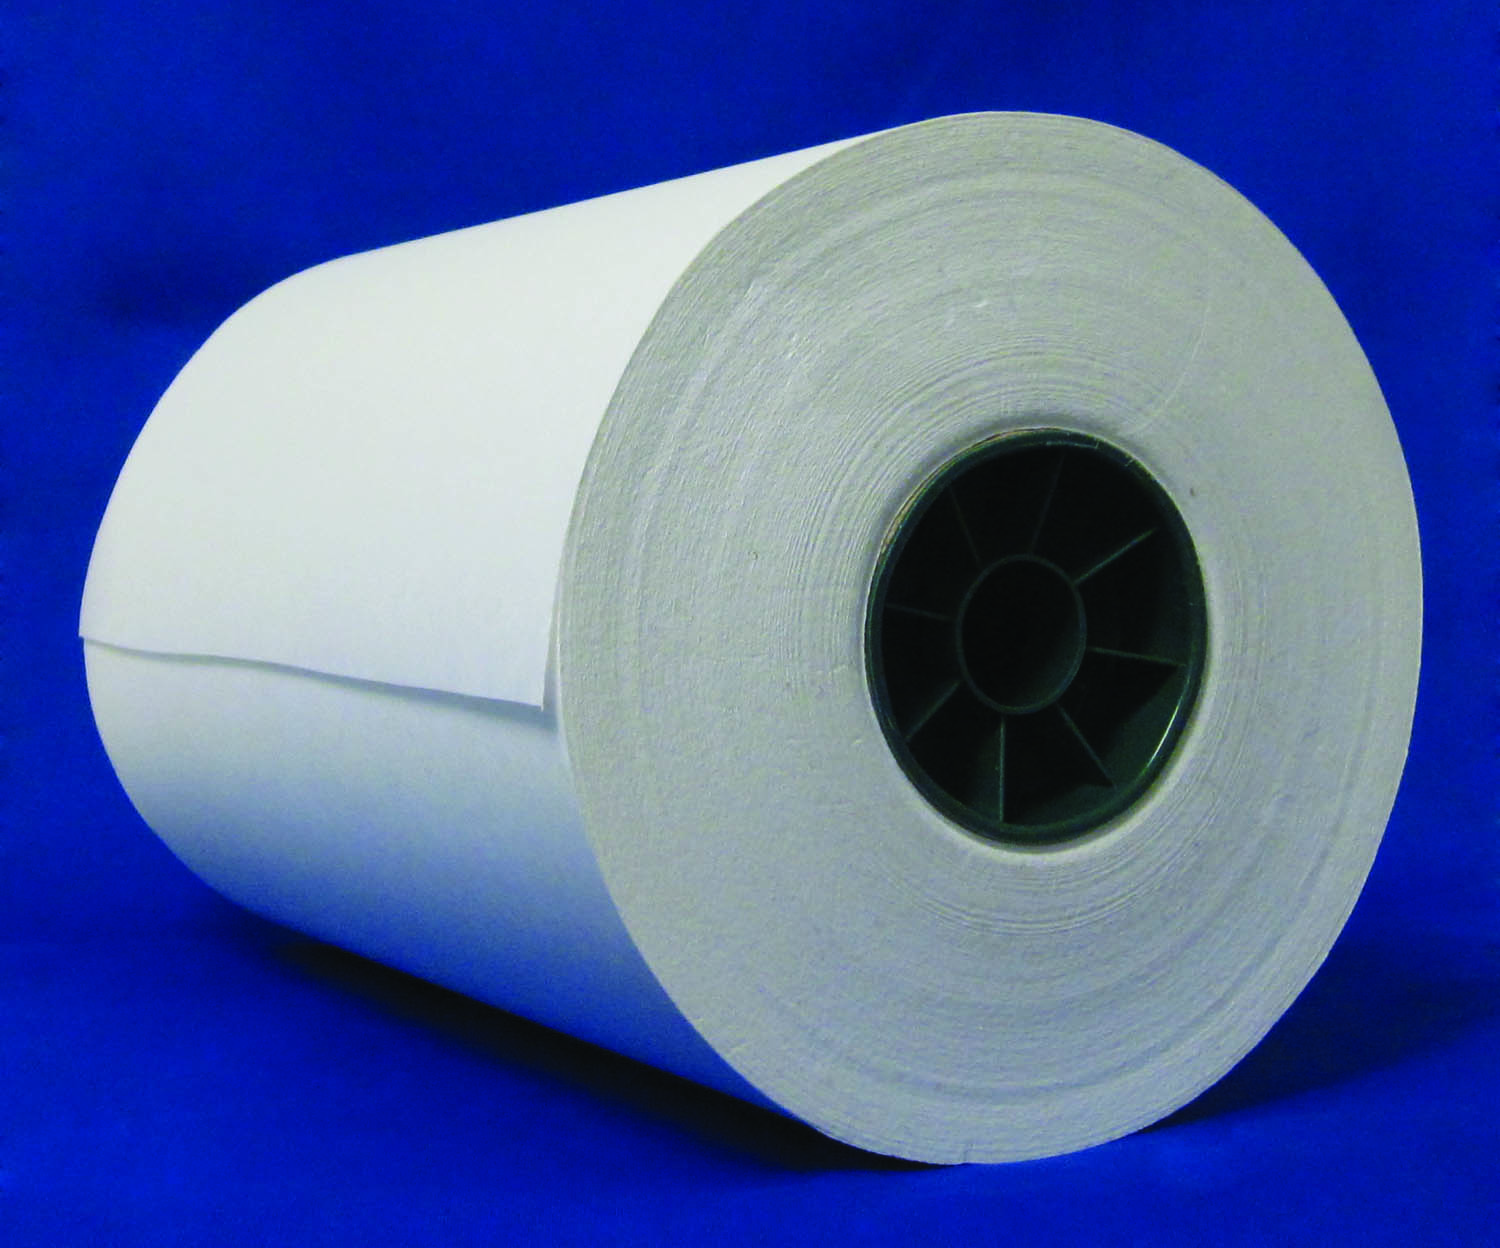 36 x 180 White Butcher Paper Roll for Wrapping Meat and Fish buy in stock  in U.S. in IDL Packaging